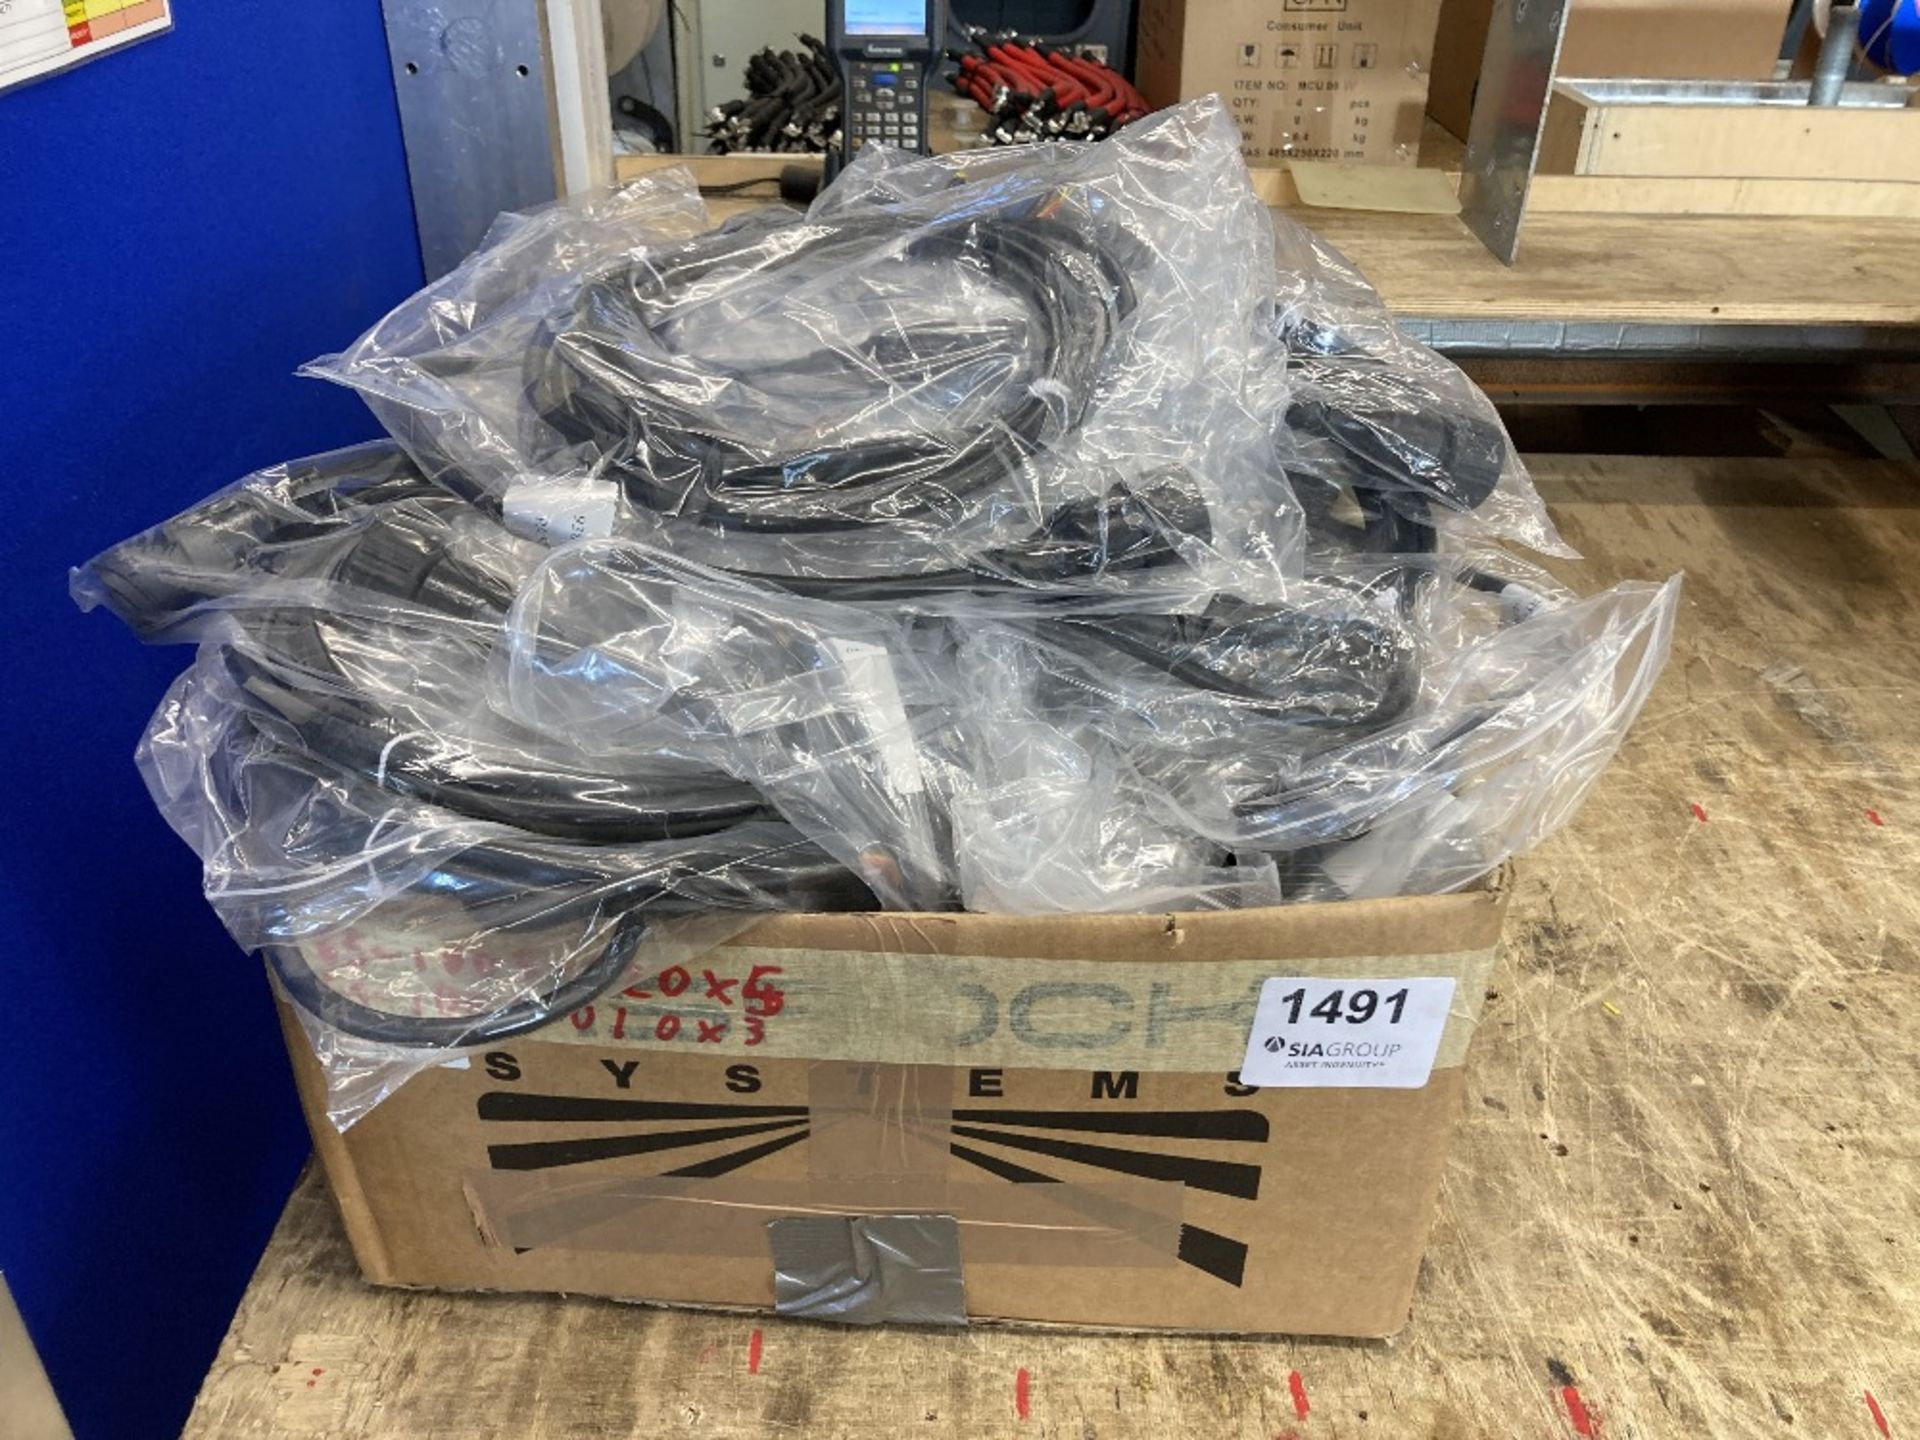 Quantity of 0.5m Mothet Harnesses and other associated electrical cabling